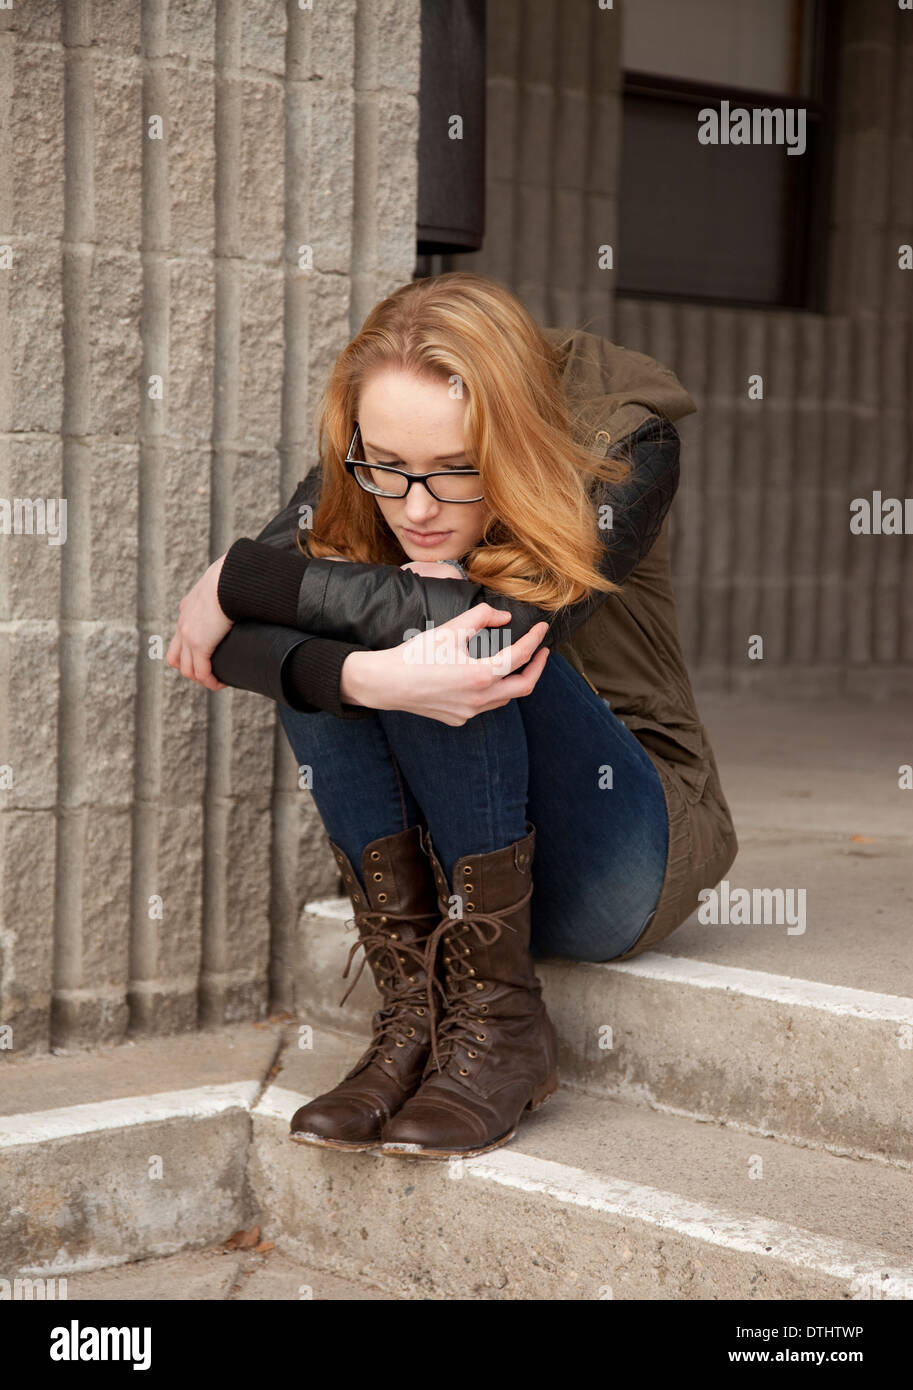 Outdoor photo of young teenage girl seated on concrete steps, hugging knees, distraught facial expression. Stock Photo